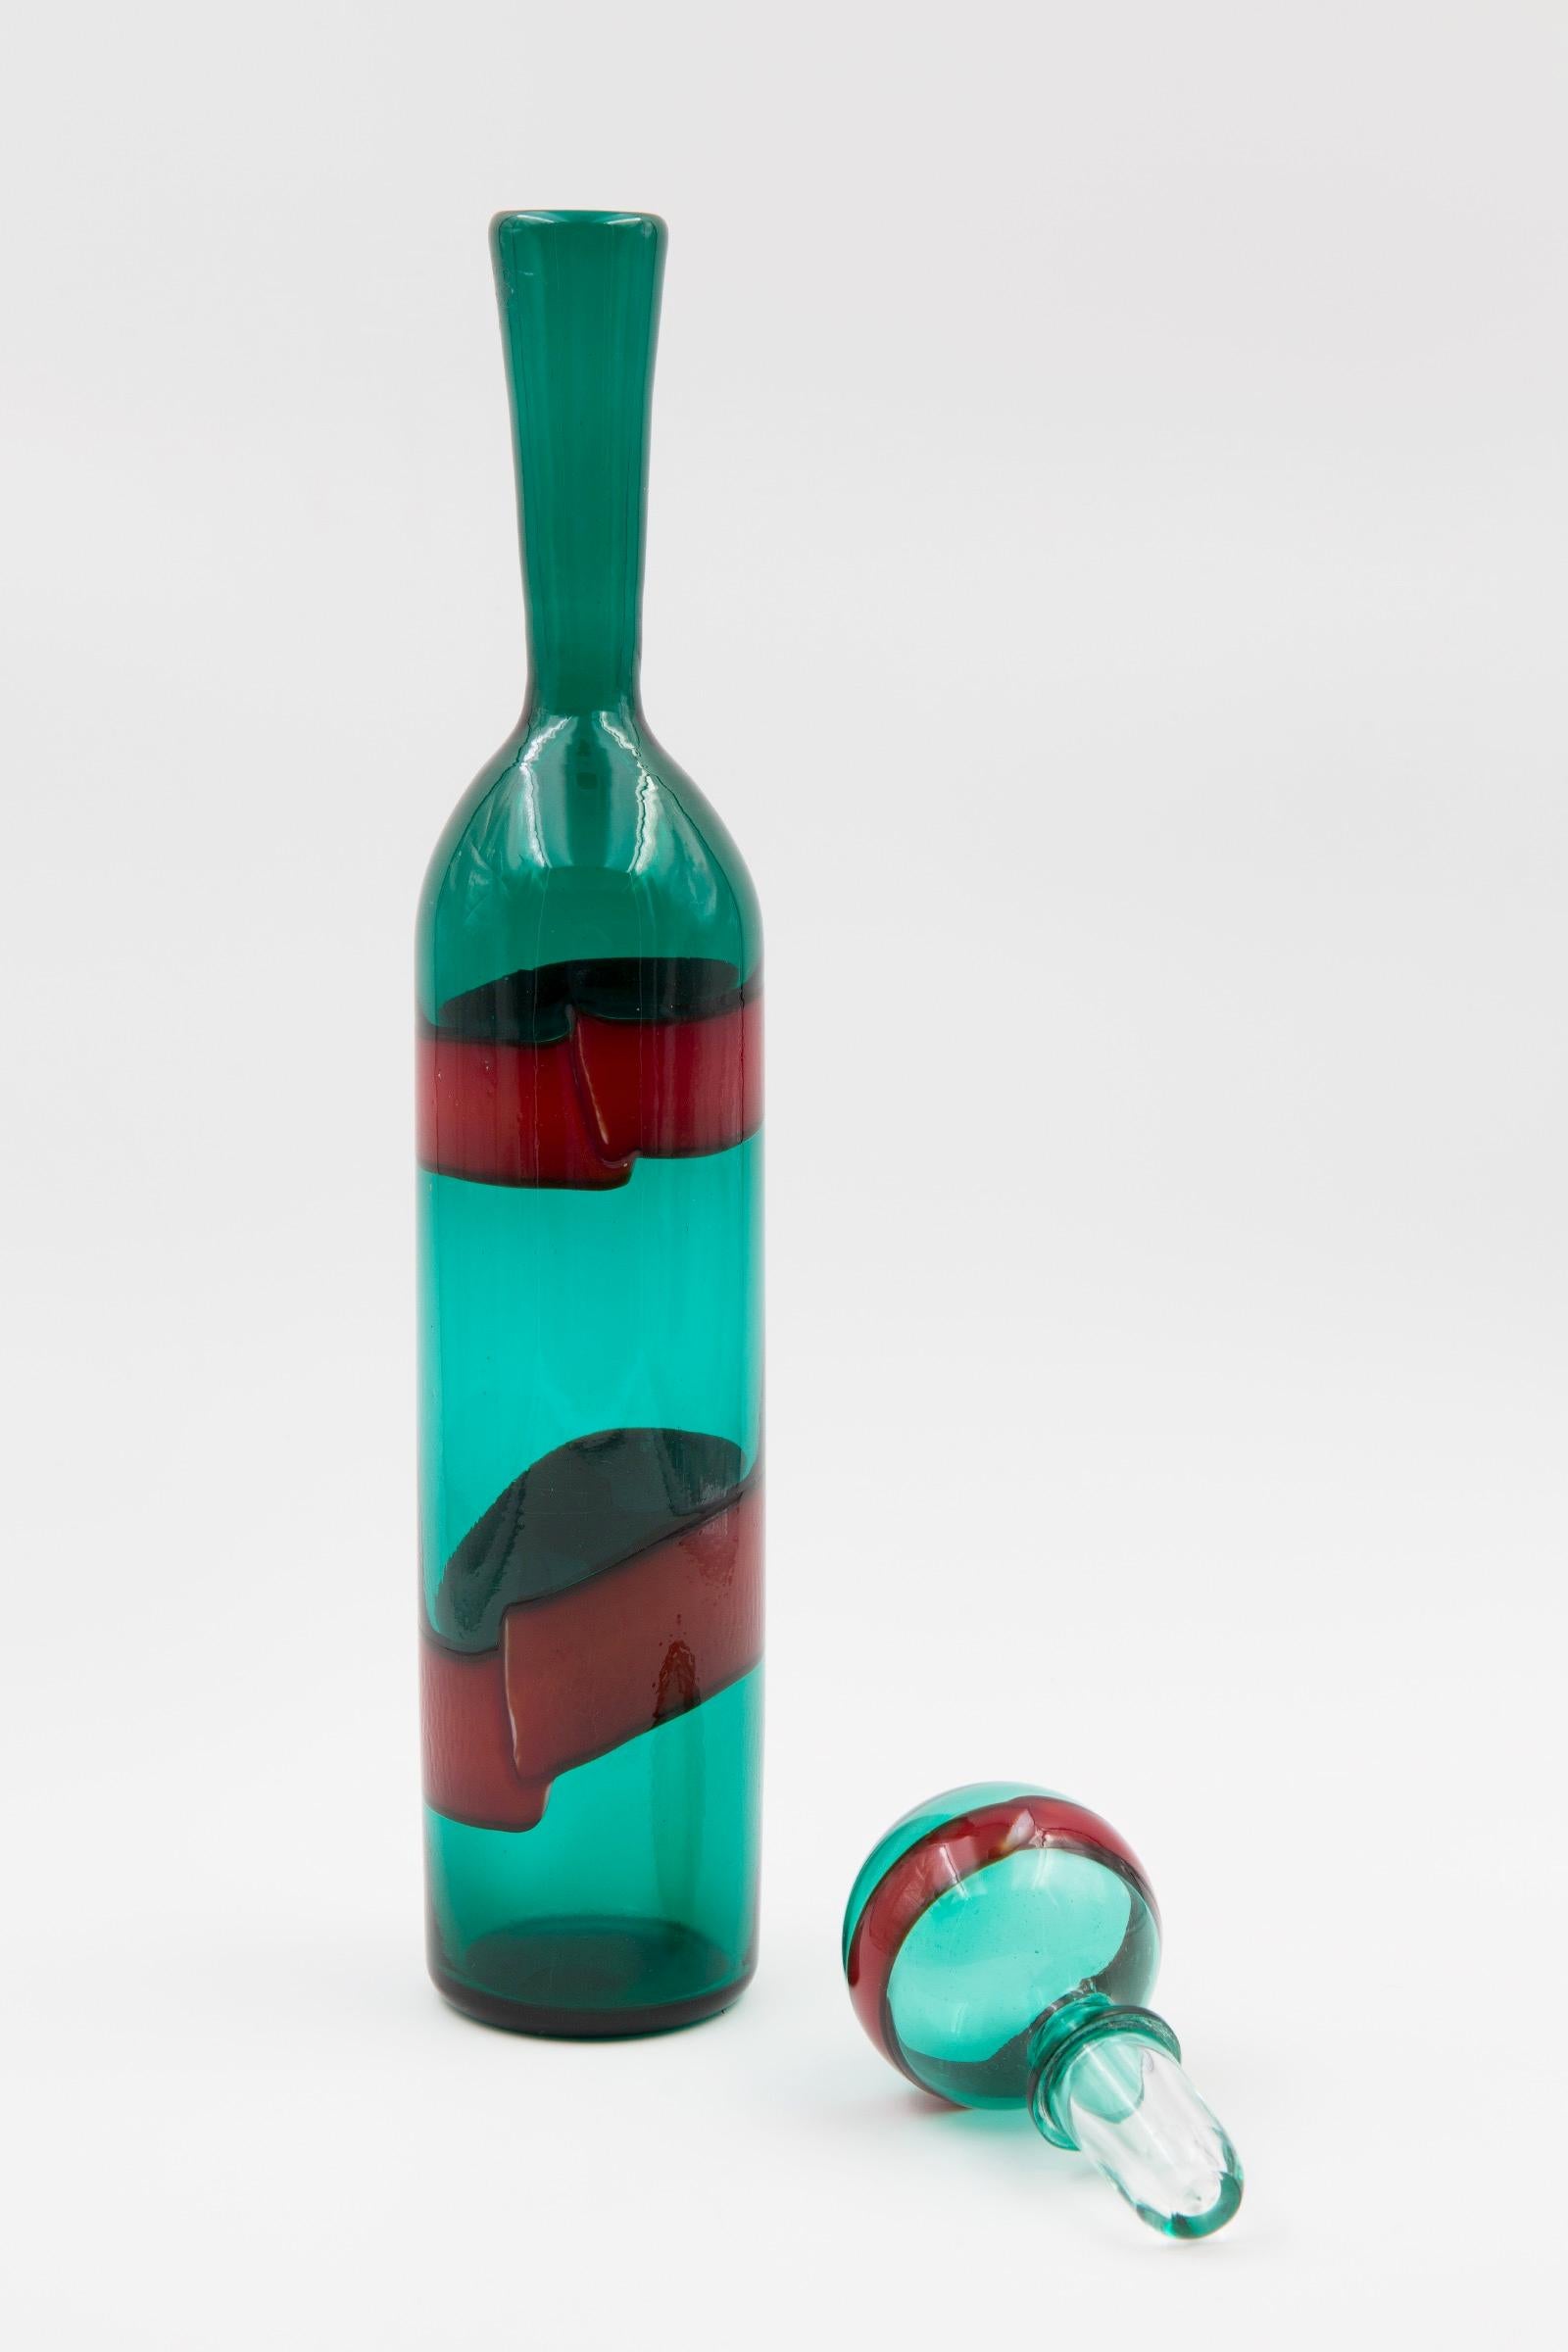 Bottle with an elongated neck in transparent green glass decorated with opaque red horizontal bands.
Known as model 4582
Elegant 1950s glass high-end item
Designed by Fulvio Bianconi and manufactured by Venini, Murano, Italy, circa 1955.